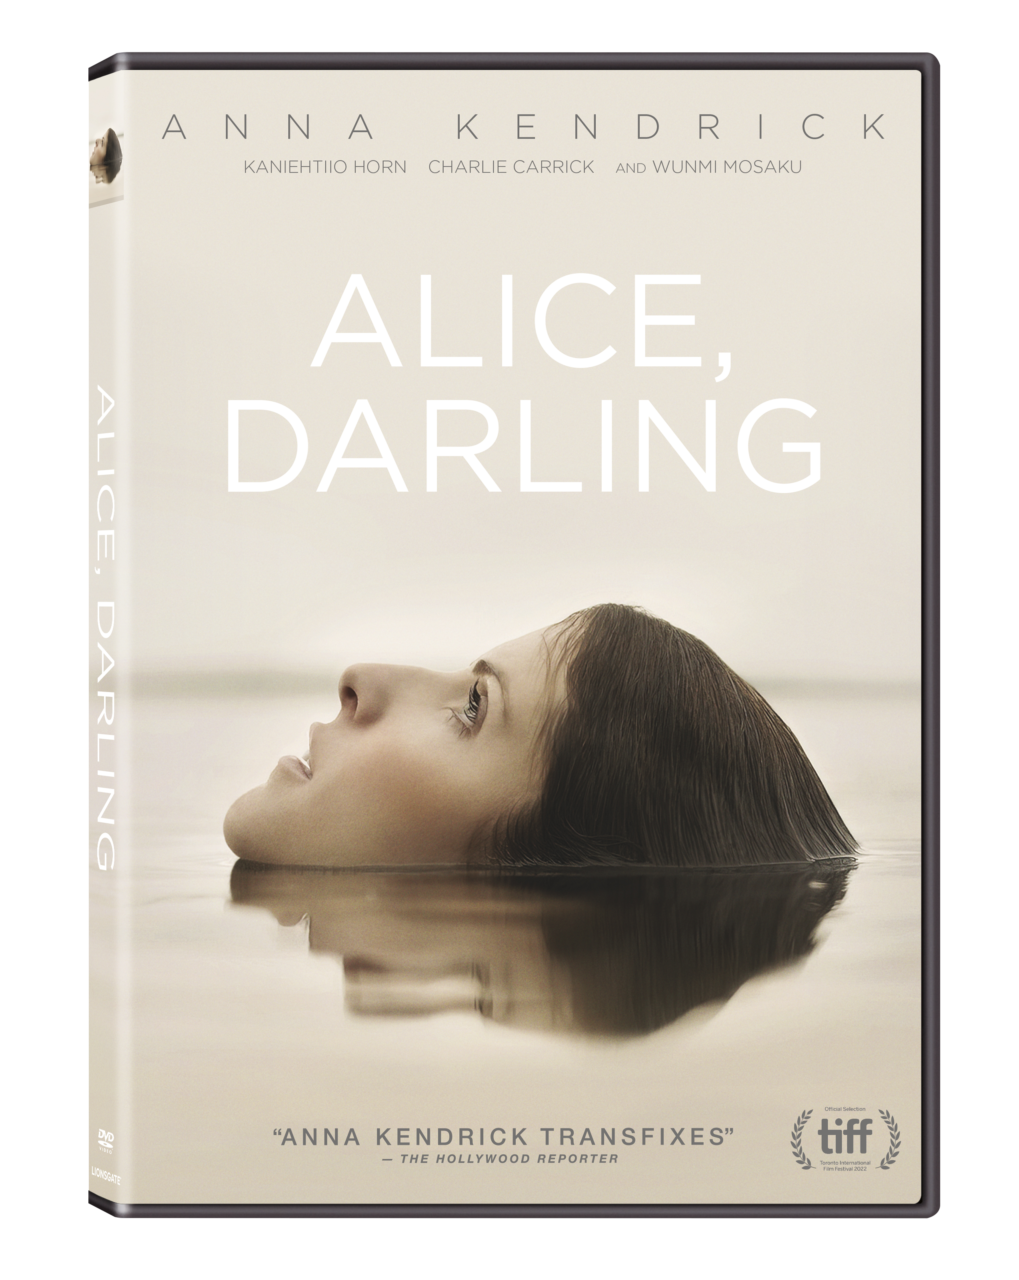 Alice, Darling DVD cover (Liosngate)